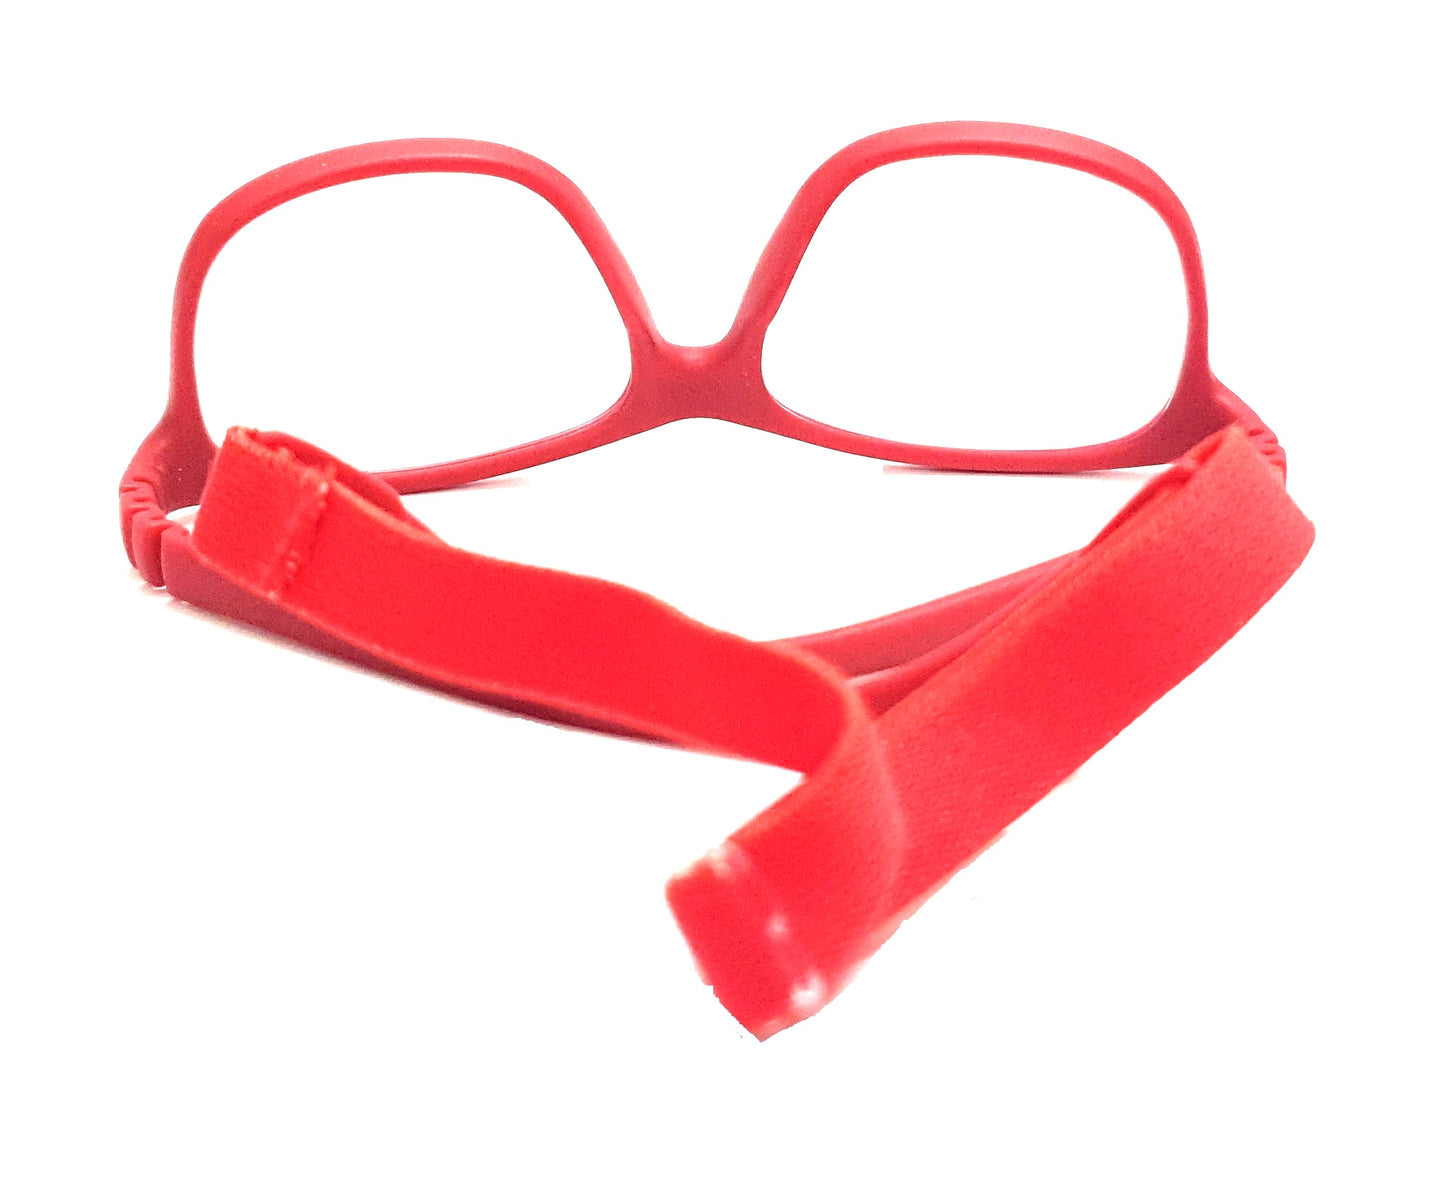 Affaires Blue Ray Block glasses Frames for Kids, Flexible, Bendable, No Screws, Glasses with anti-reflection | BC-287 (Red)